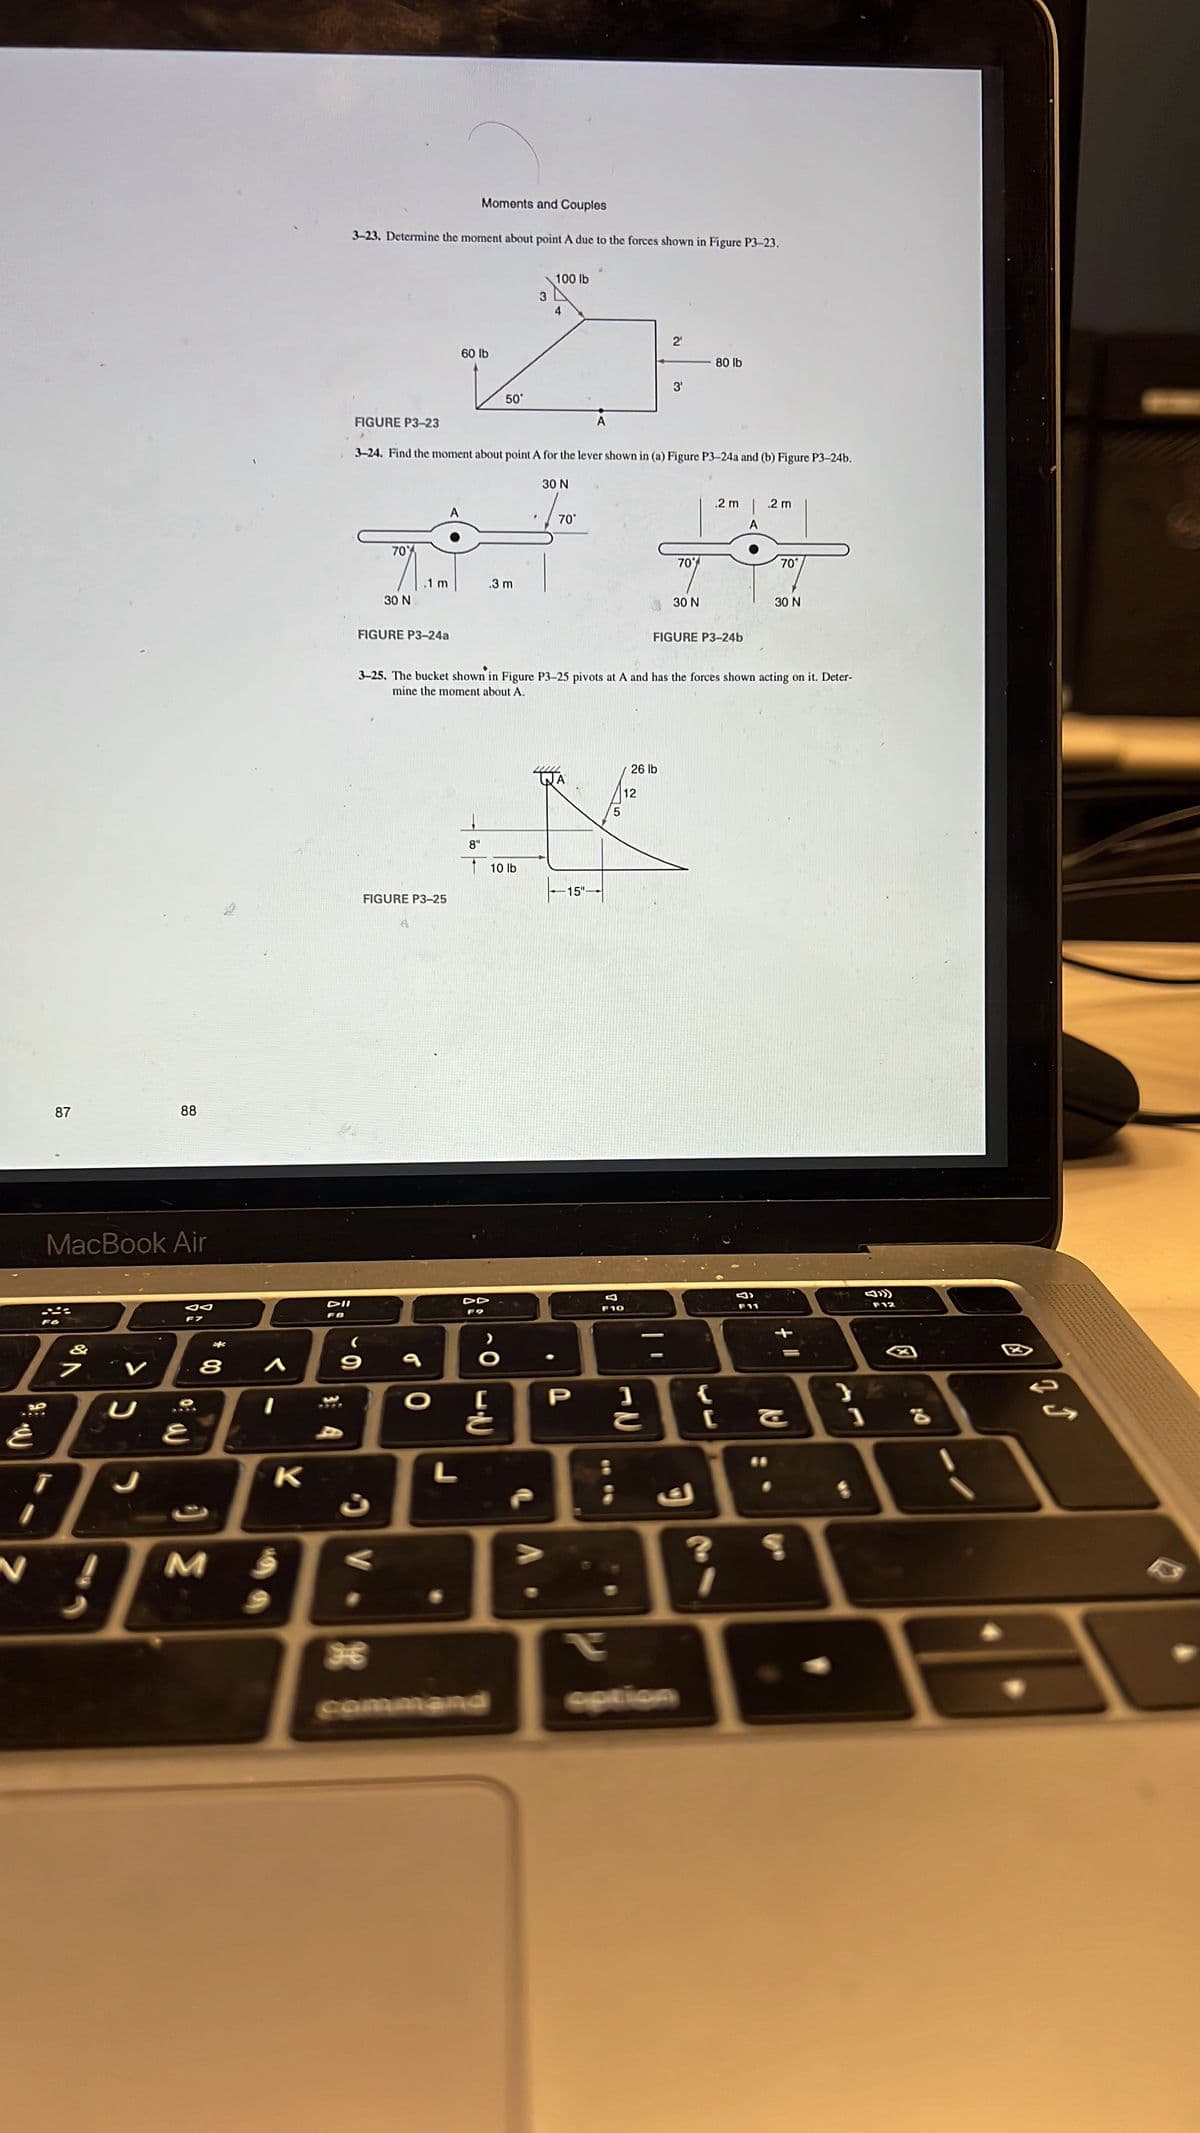 87
88
MacBook Air
JA
F7
7
' ت
غ
T
D
3
N
J
8
E
M
A
K
;
DII
FB
Moments and Couples
3-23. Determine the moment about point A due to the forces shown in Figure P3-23.
2₁
80 lb
3'
FIGURE P3-23
3-24. Find the moment about point A for the lever shown in (a) Figure P3-24a and (b) Figure P3-24b.
30 N
.2 m
.2 m
7071.1 m
70°
.3 m
30 N
30 N
30 N
FIGURE P3-24a
FIGURE P3-24b
3-25. The bucket shown in Figure P3-25 pivots at A and has the forces shown acting on it. Deter-
mine the moment about A.
26 lb
8"
9
FIGURE P3-25
36
O
L
شم
60 lb
DD
50°
10 lb
command
3
♦
21C
>
100 lb
4
70°
15"-
P
5
12
Q
F11
F10
BE
diz
{
S
;
ك
J»)
F12
34
га
2